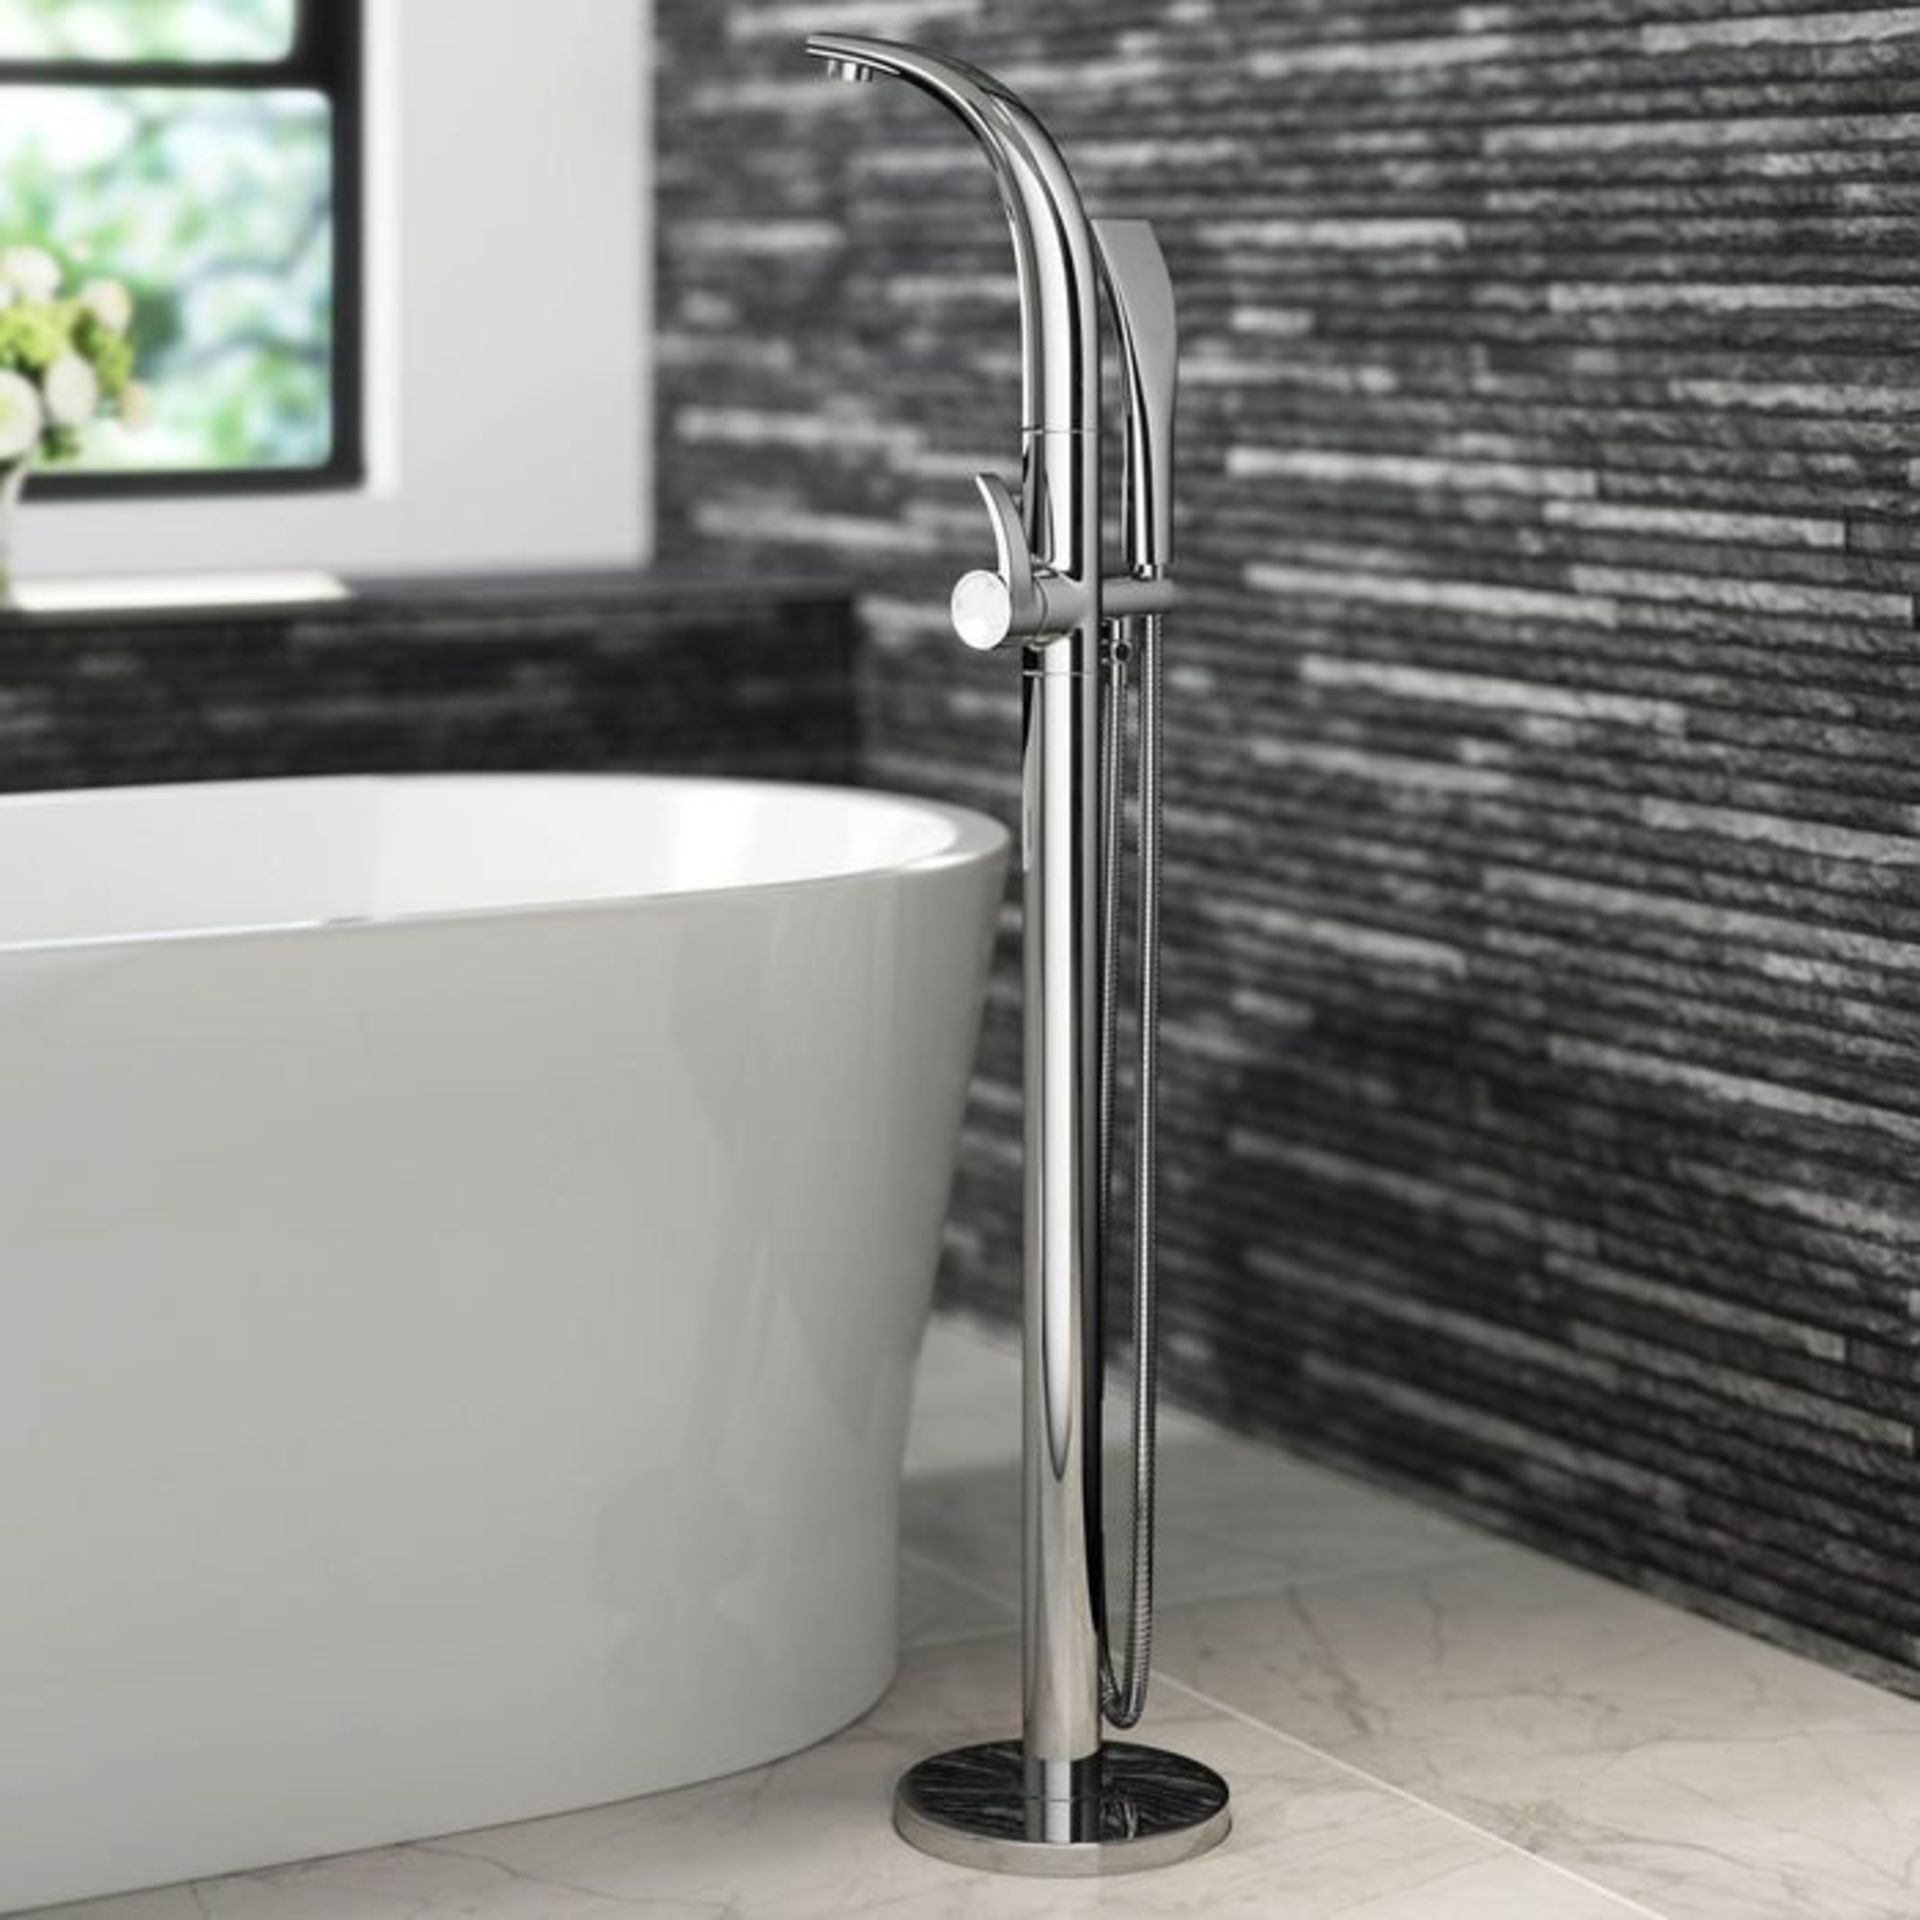 (H11) Ava Freestanding Bath Mixer Tap with Hand Held Shower Head. We love this because it has a